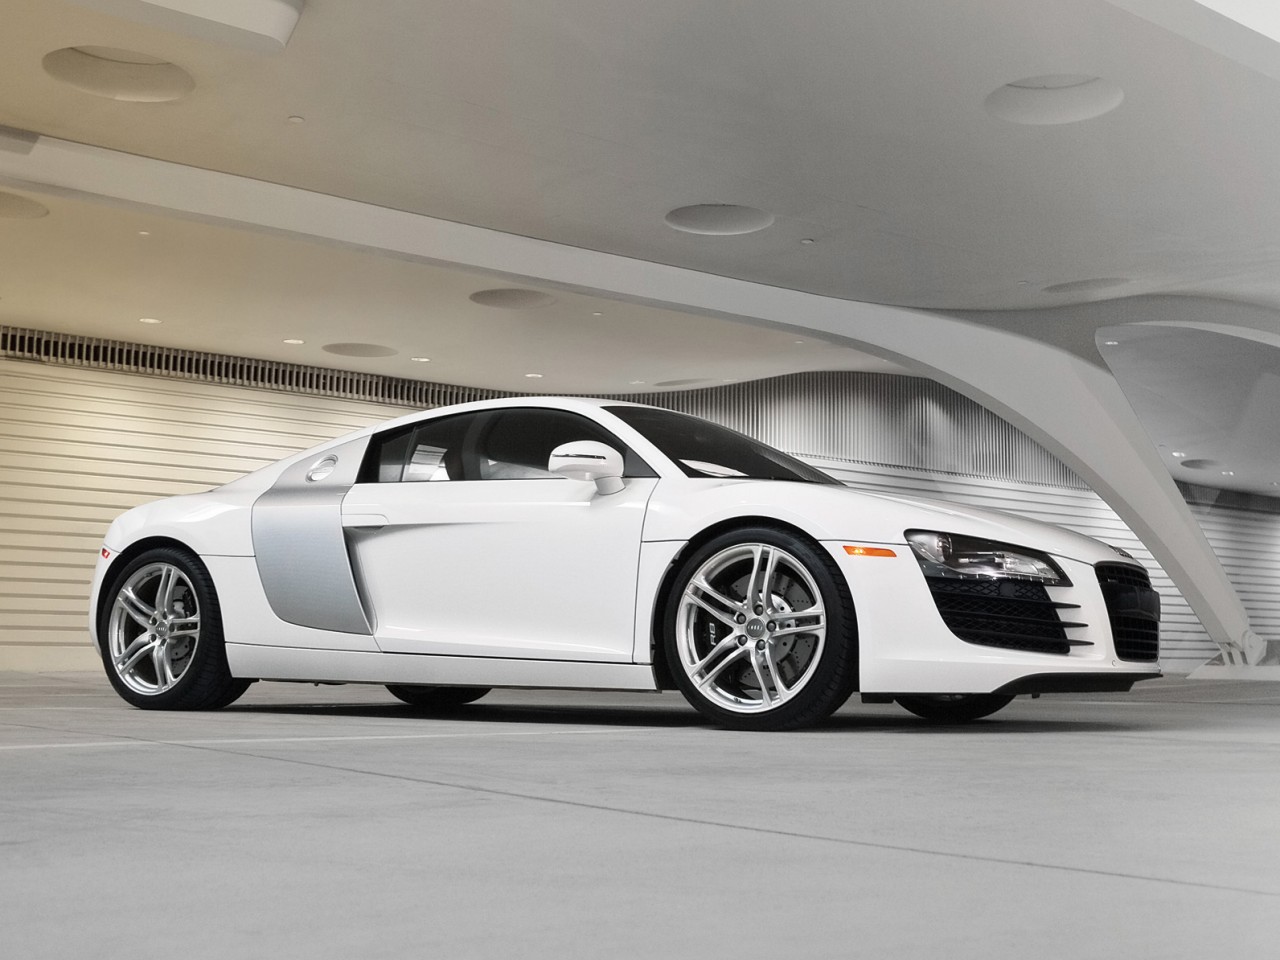 A New Standard In Luxury: The 2009 Audi R8